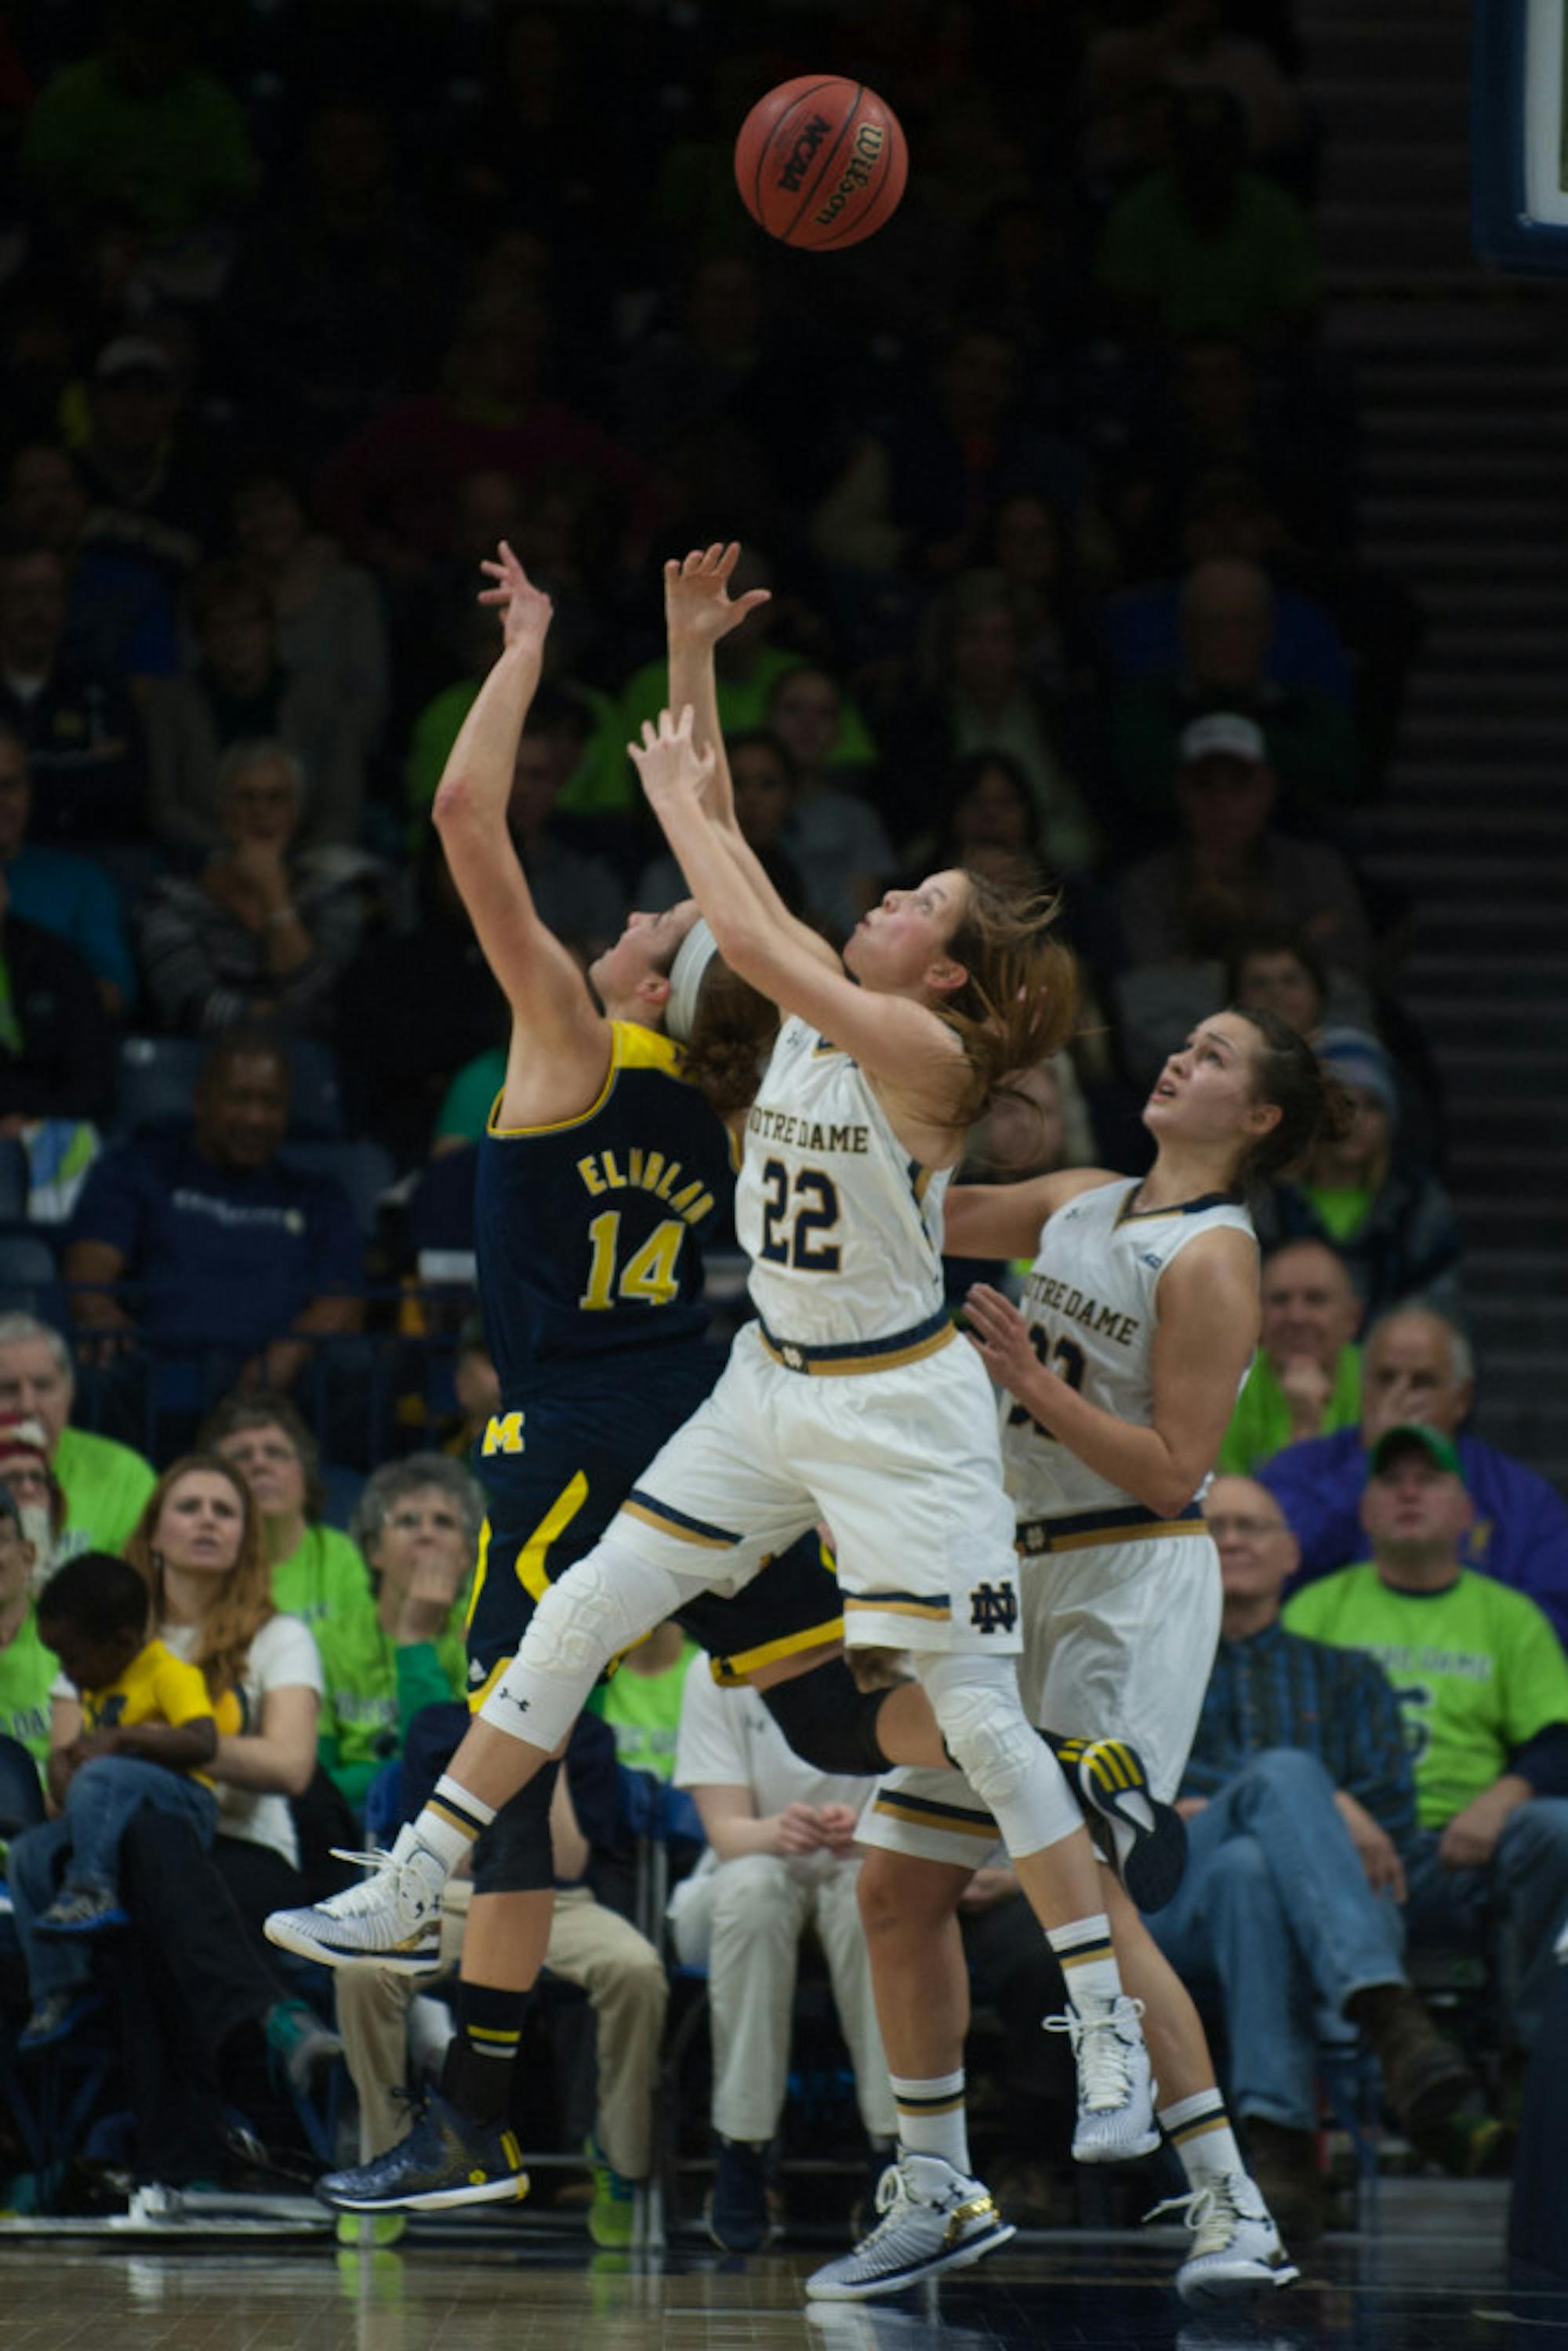 Irish senior guard Madison Cable leaps for a rebound during a 70-50 win over Michigan on Dec. 13 at Purcell Pavilion.